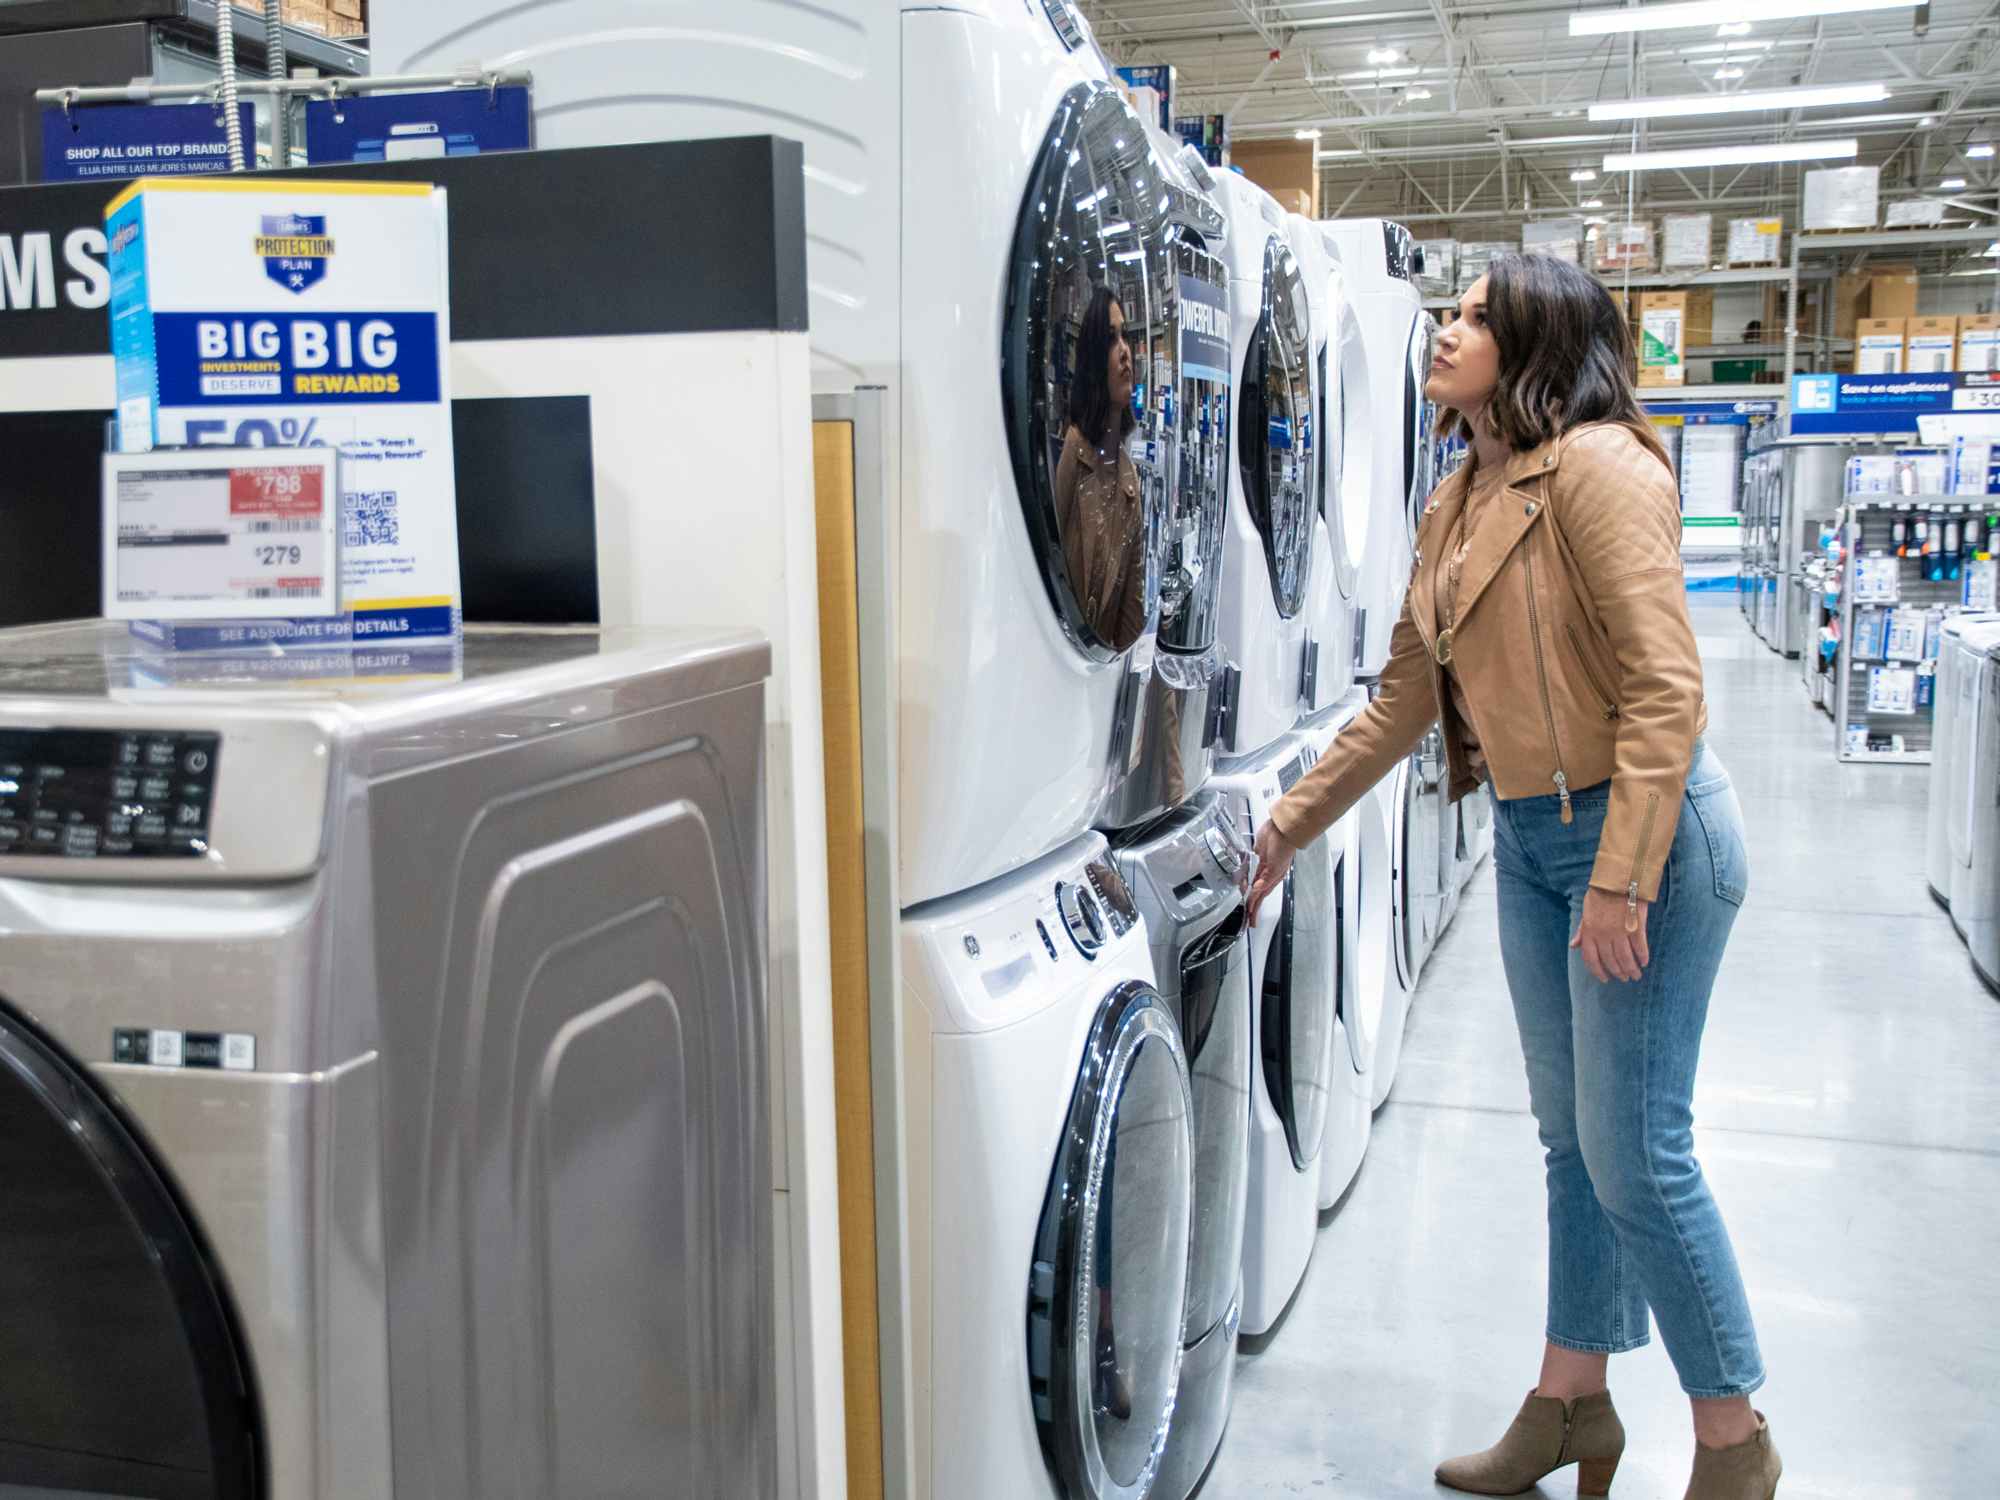 https://prod-cdn-thekrazycouponlady.imgix.net/wp-content/uploads/2021/03/lowes-black-friday-large-appliance-sale-washer-dryer-joanie-reupload-1677169174-1677169174.jpg?auto=format&fit=fill&q=25